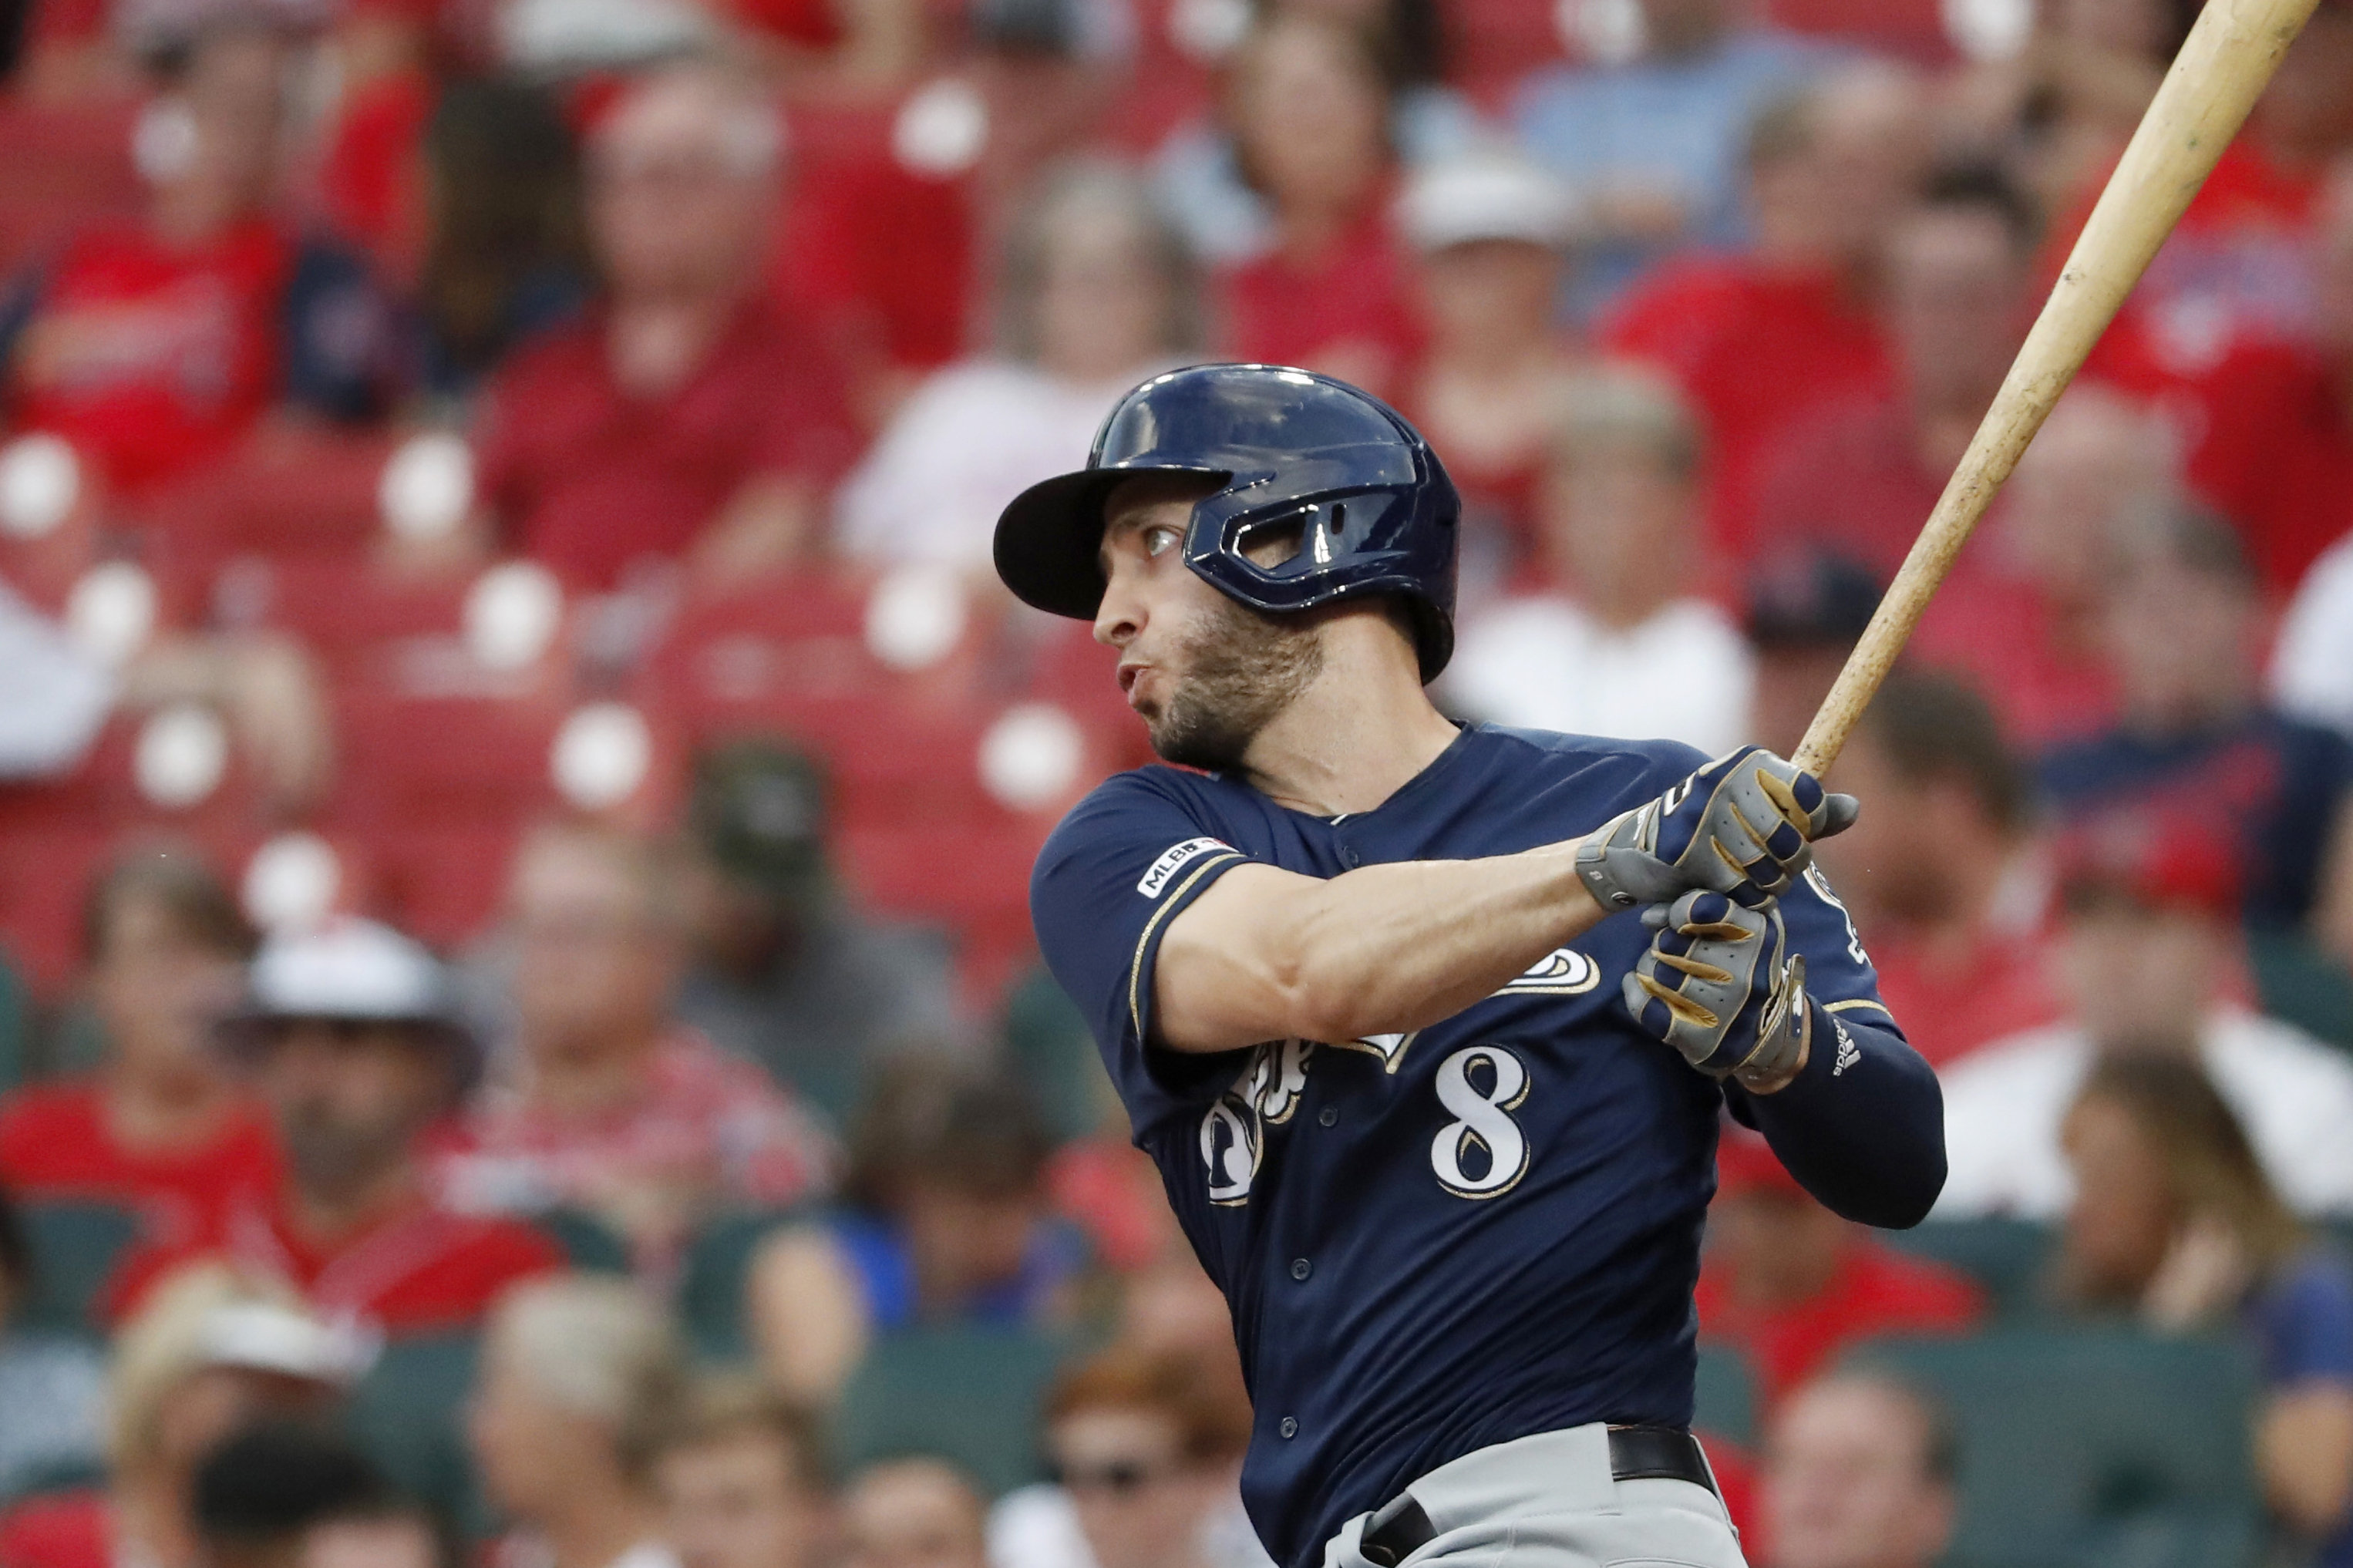 Milwaukee Brewers' slugger Ryan Braun announces retirement after 14 seasons  - The Globe and Mail